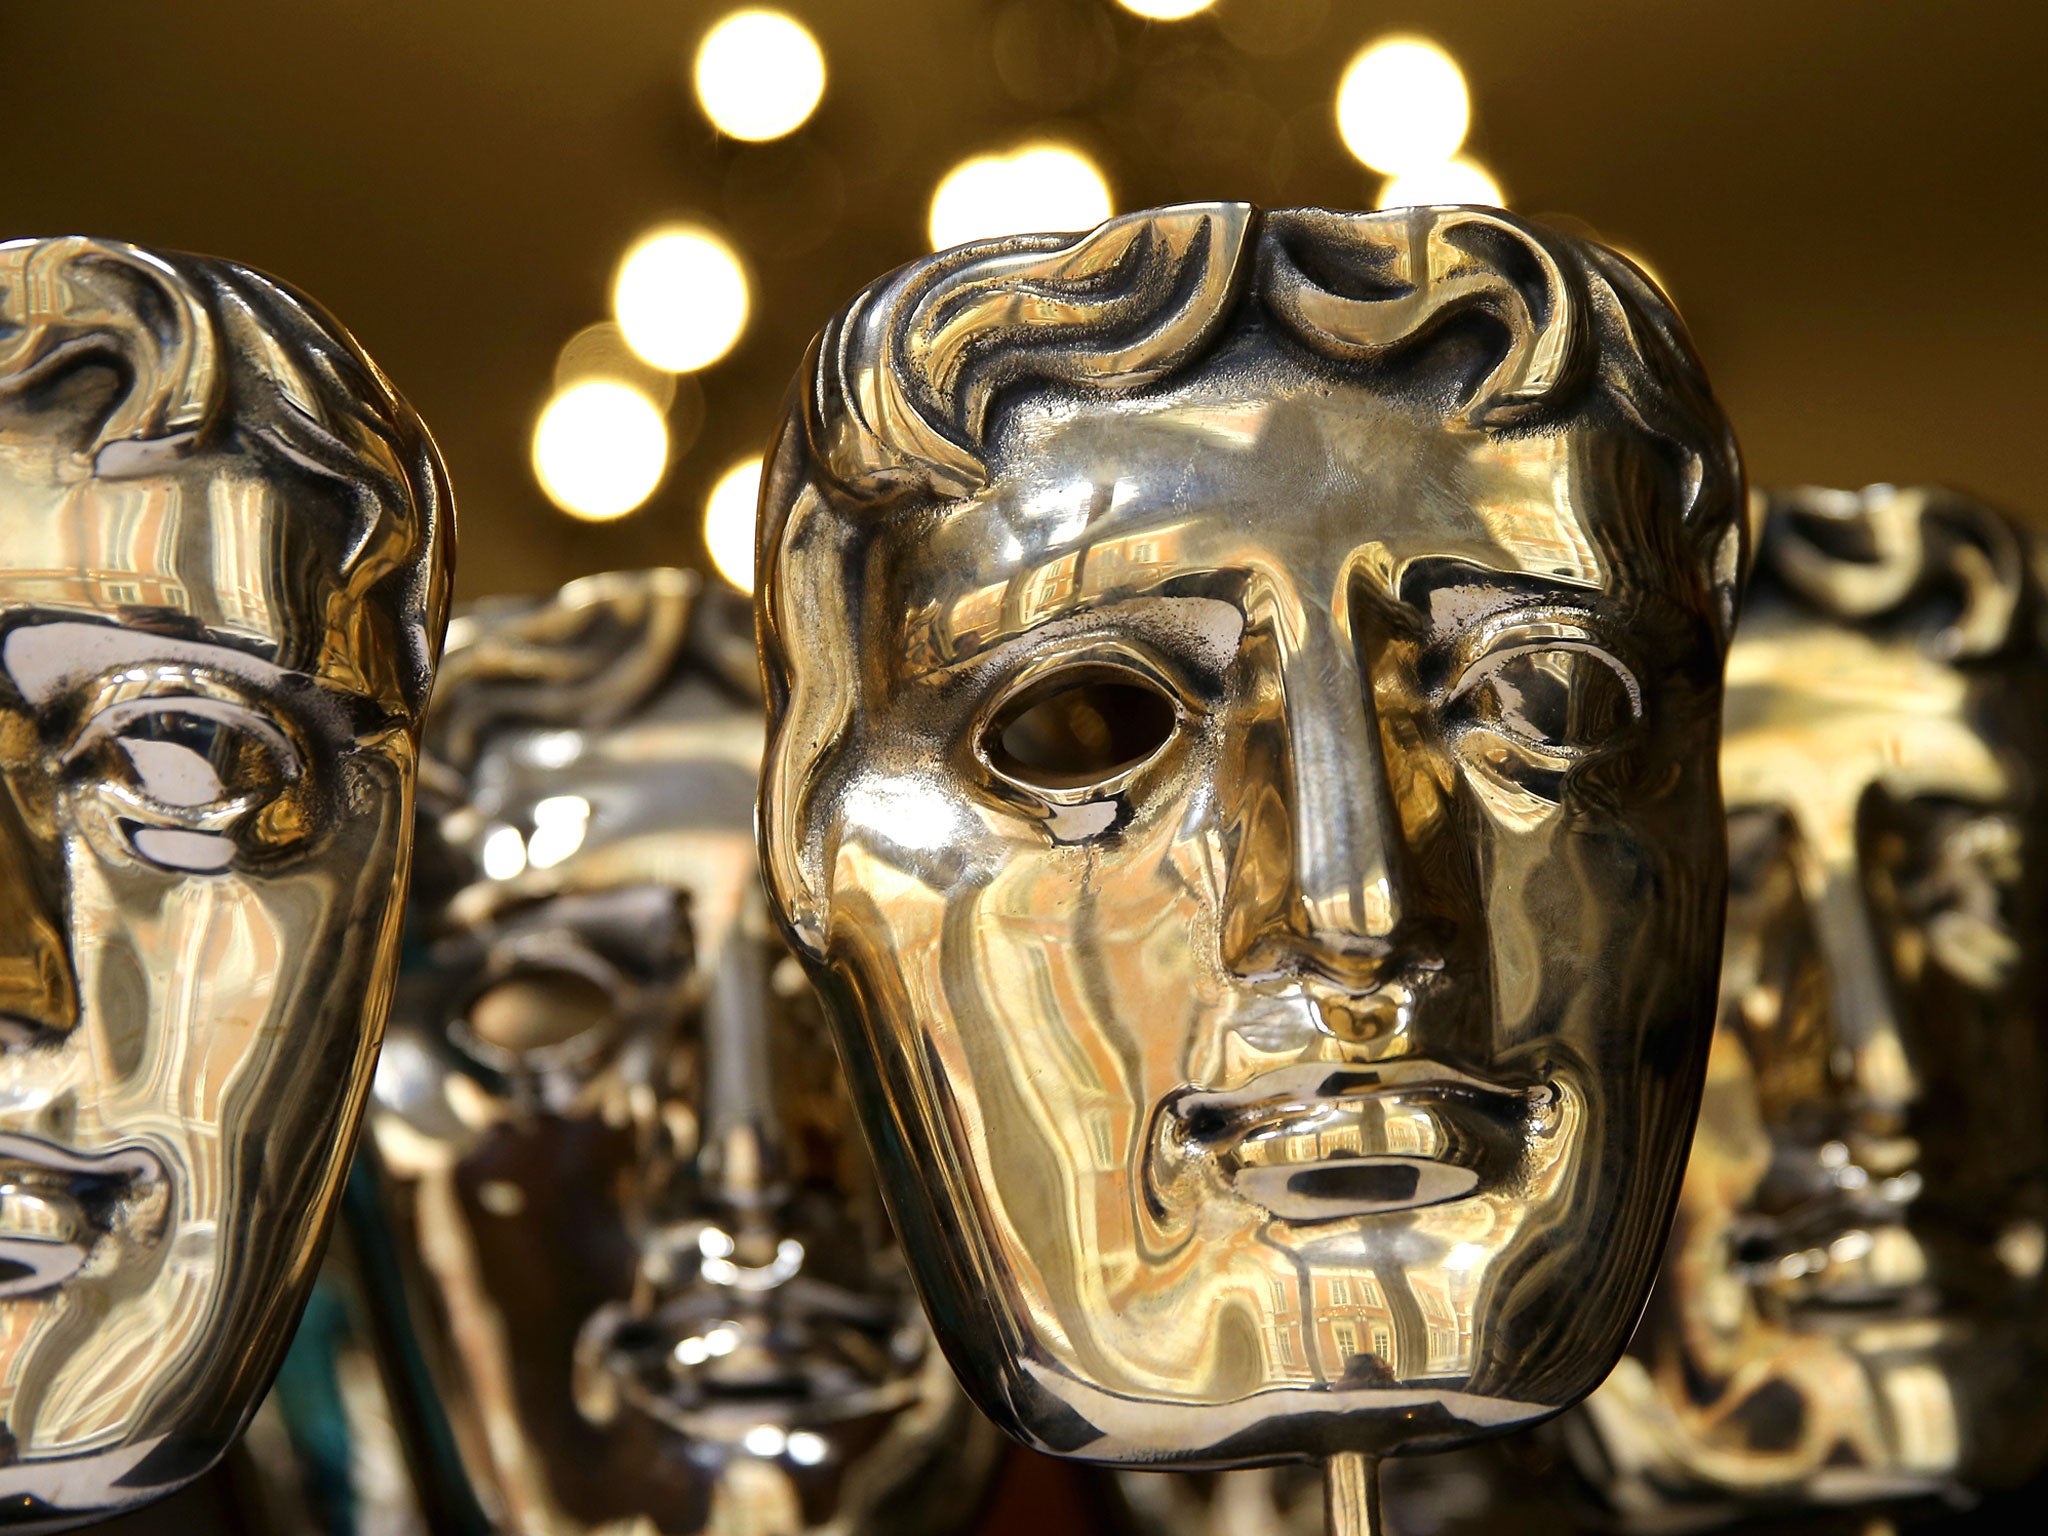 The iconic BAFTA mask awards sit ready to be polished at the Savoy Hotel ahead of the British Academy Film Awards